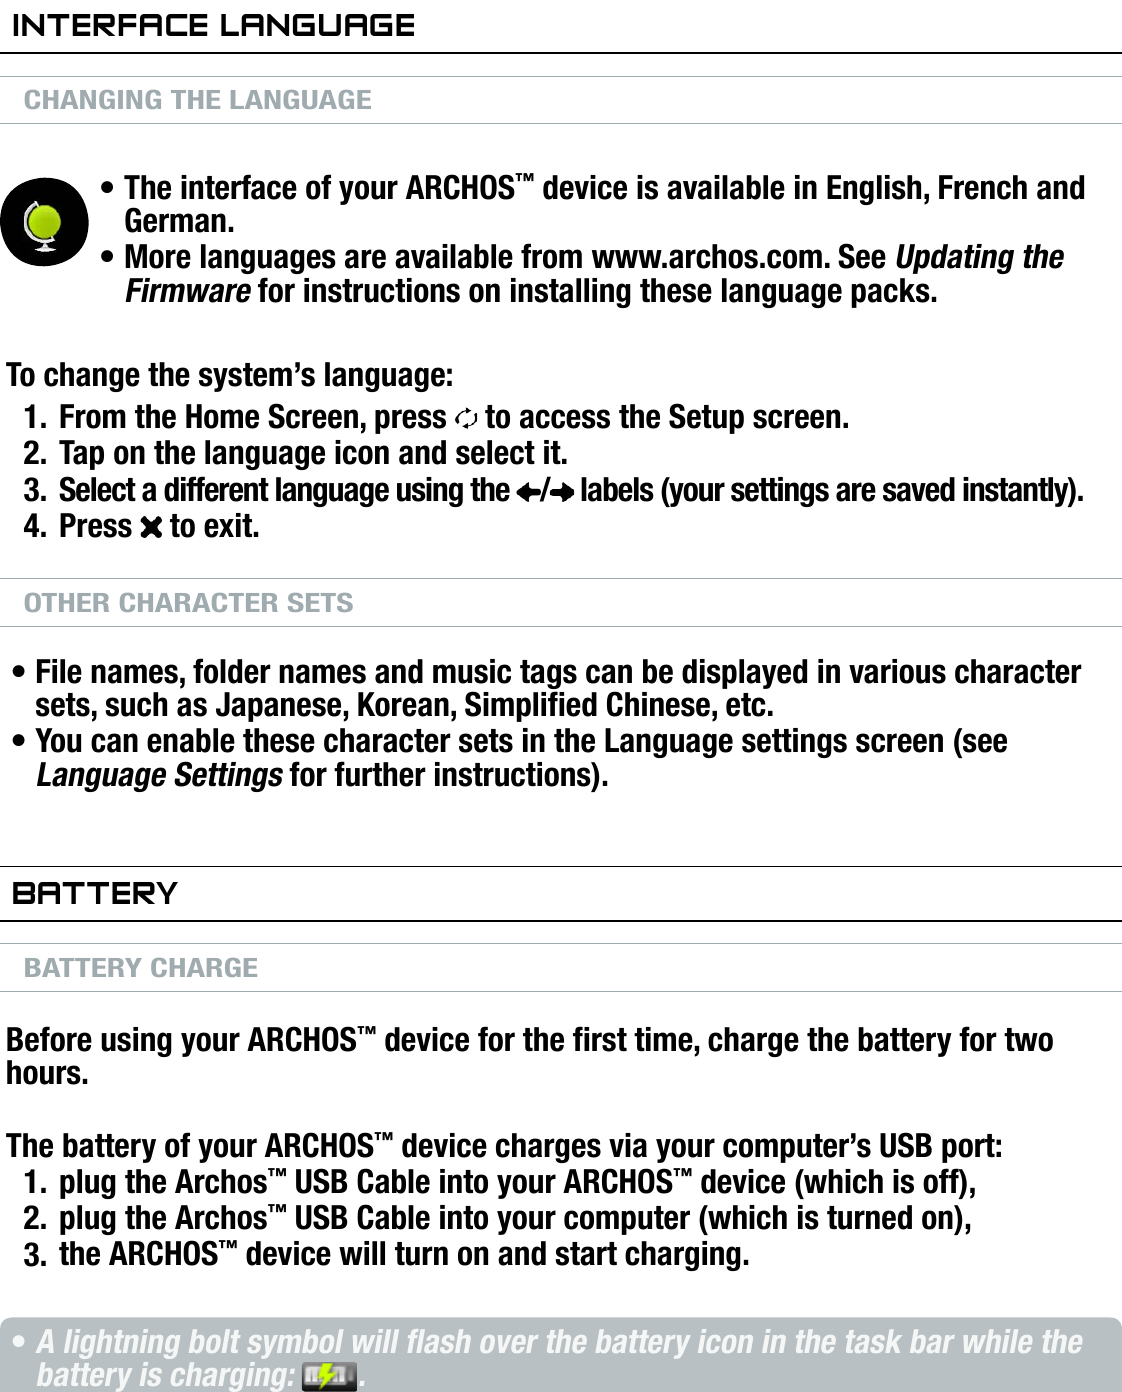 704MANUAL V0.0INTRODUCTION   &gt;   p. 6inTerfaCe languageCHANGING THE LANGUAGEThe interface of your ARCHOS™ device is available in English, French and German.More languages are available from www.archos.com. See Updating the Firmware for instructions on installing these language packs.To change the system’s language:From the Home Screen, press   to access the Setup screen.Tap on the language icon and select it.Select a different language using the  /  labels (your settings are saved instantly).Press   to exit.OTHER CHARACTER SETSFile names, folder names and music tags can be displayed in various character sets, such as Japanese, Korean, Simplied Chinese, etc.You can enable these character sets in the Language settings screen (see Language Settings for further instructions).baTTeryBATTERY CHARGEBefore using your ARCHOS™ device for the rst time, charge the battery for two hours.The battery of your ARCHOS™ device charges via your computer’s USB port:plug the Archos™ USB Cable into your ARCHOS™ device (which is off),plug the Archos™ USB Cable into your computer (which is turned on),the ARCHOS™ device will turn on and start charging.A lightning bolt symbol will ash over the battery icon in the task bar while the battery is charging:  .The CHG indicator LED is on while the battery is charging; it will blink when the battery is fully charged.••1.2.3.4.••1.2.3.••